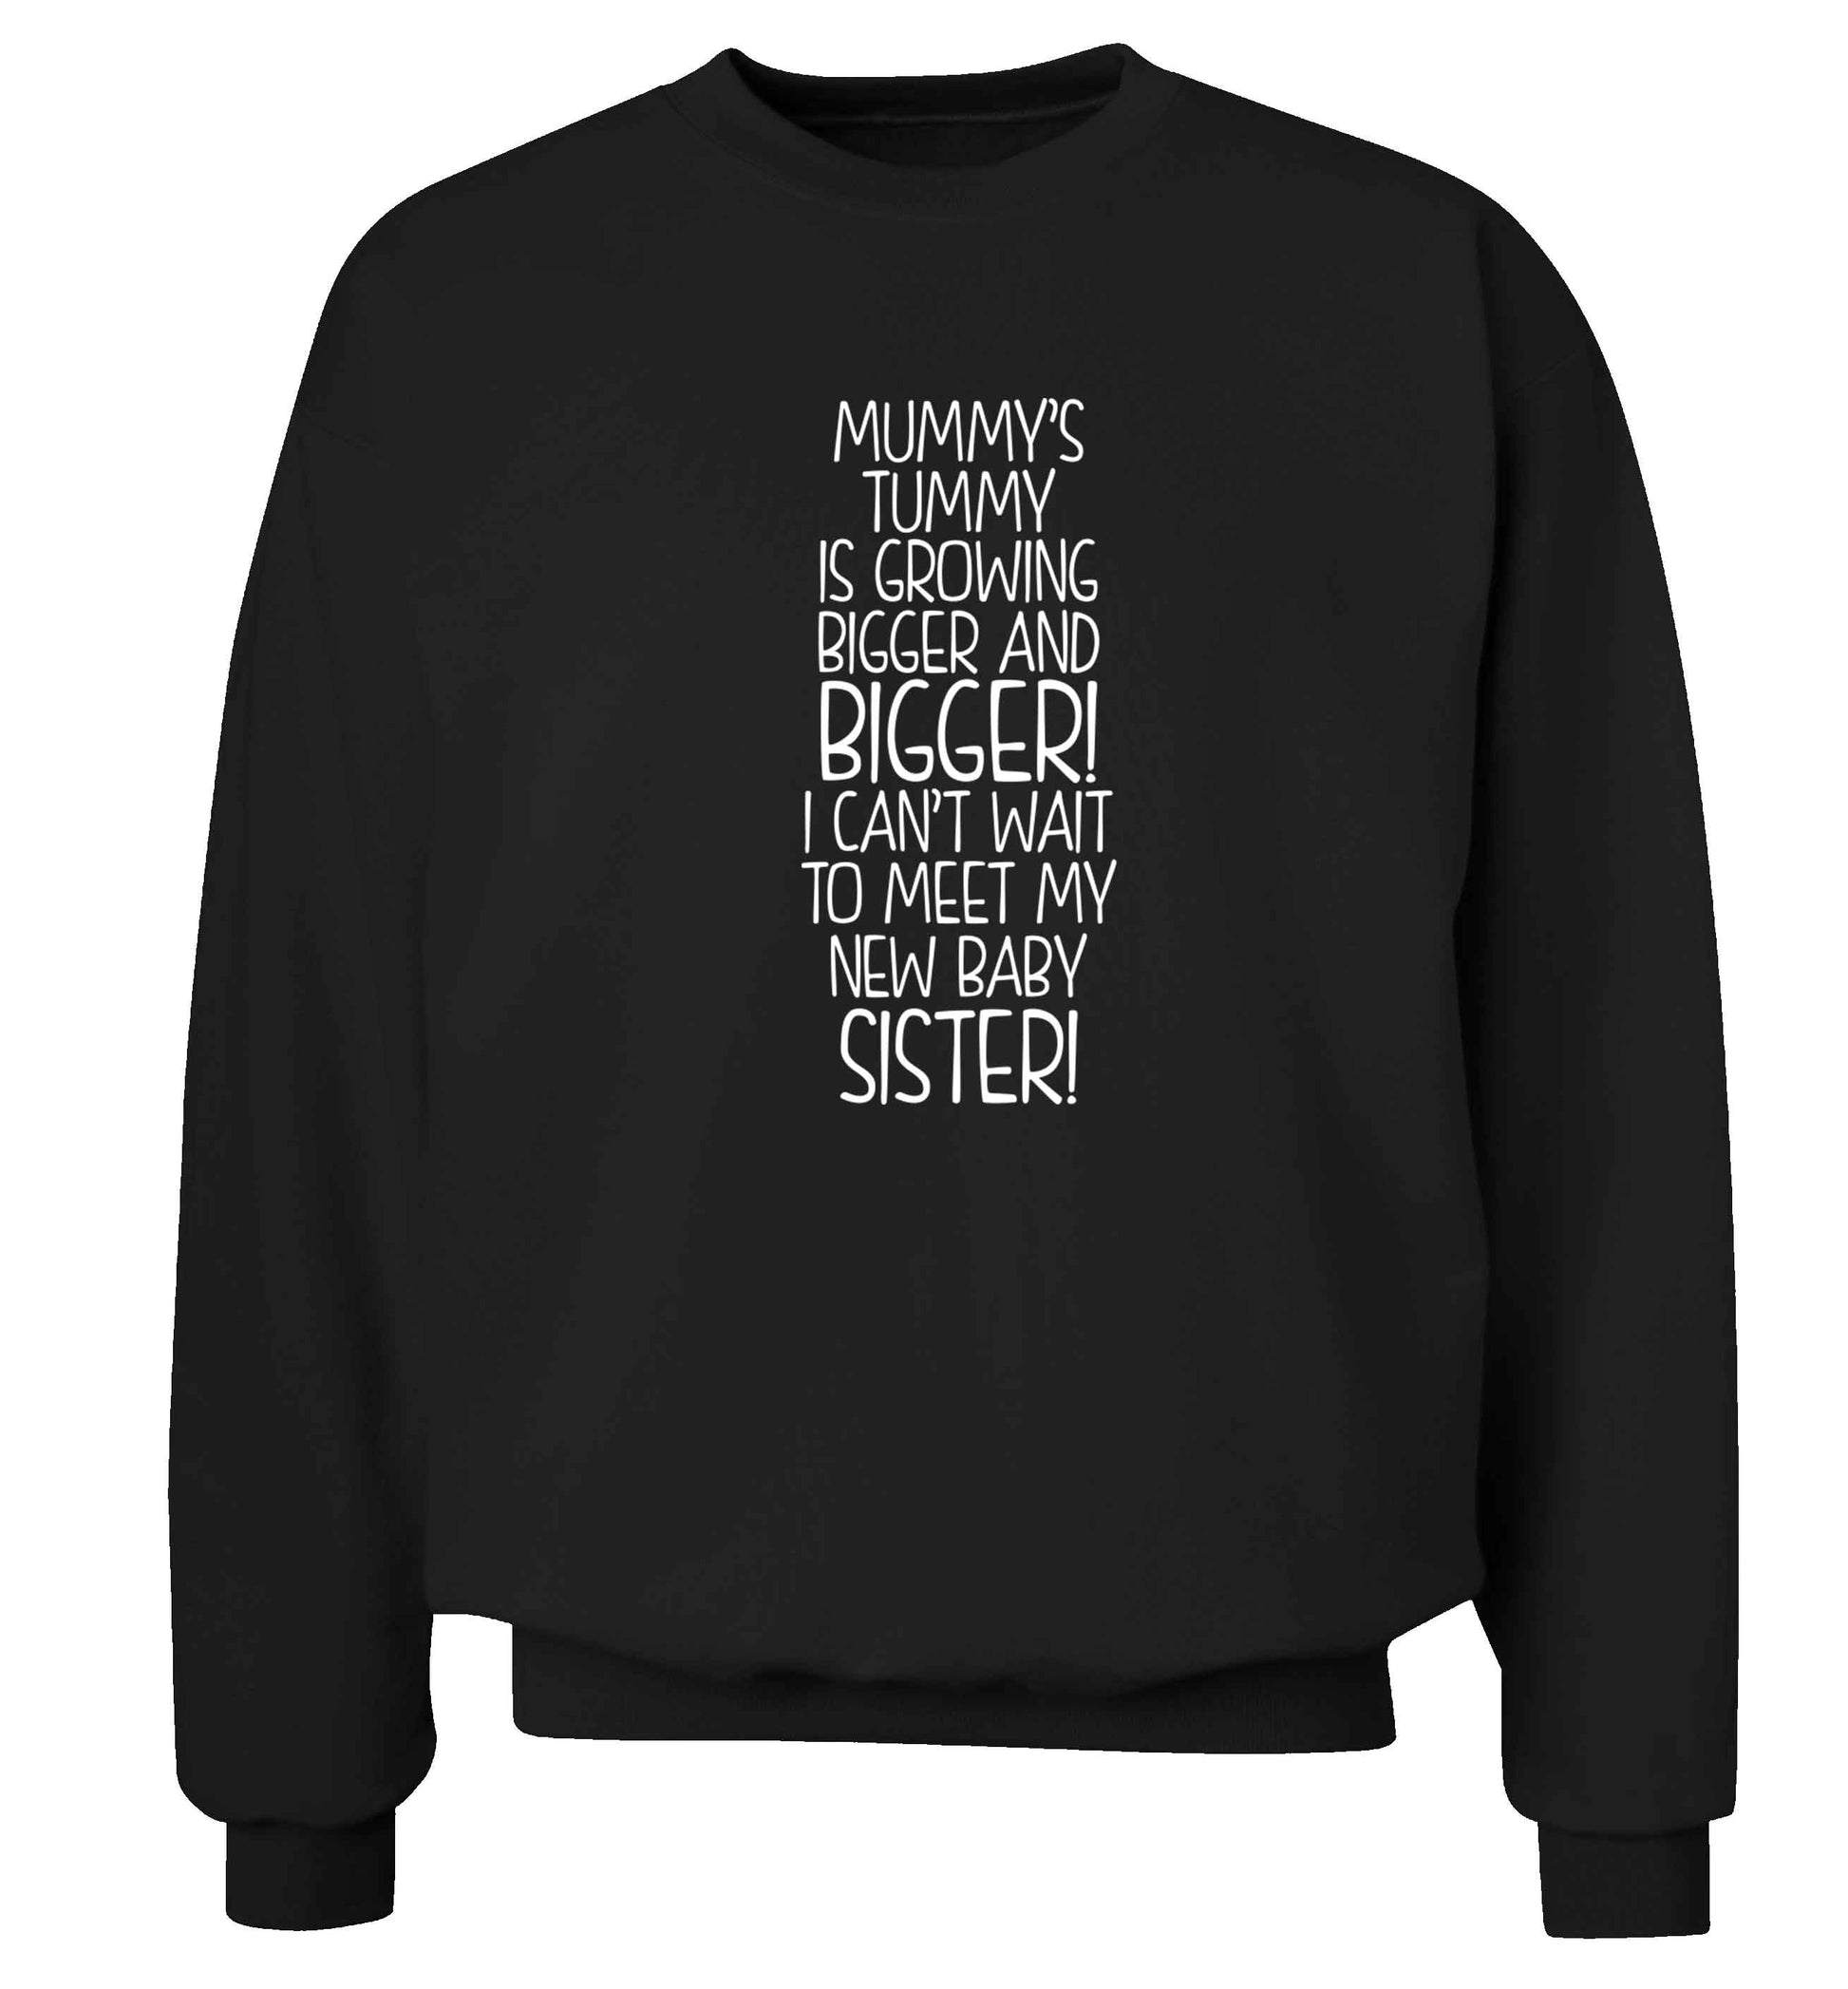 Mummy's tummy is growing bigger and bigger I can't wait to meet my new baby sister! Adult's unisex black Sweater 2XL